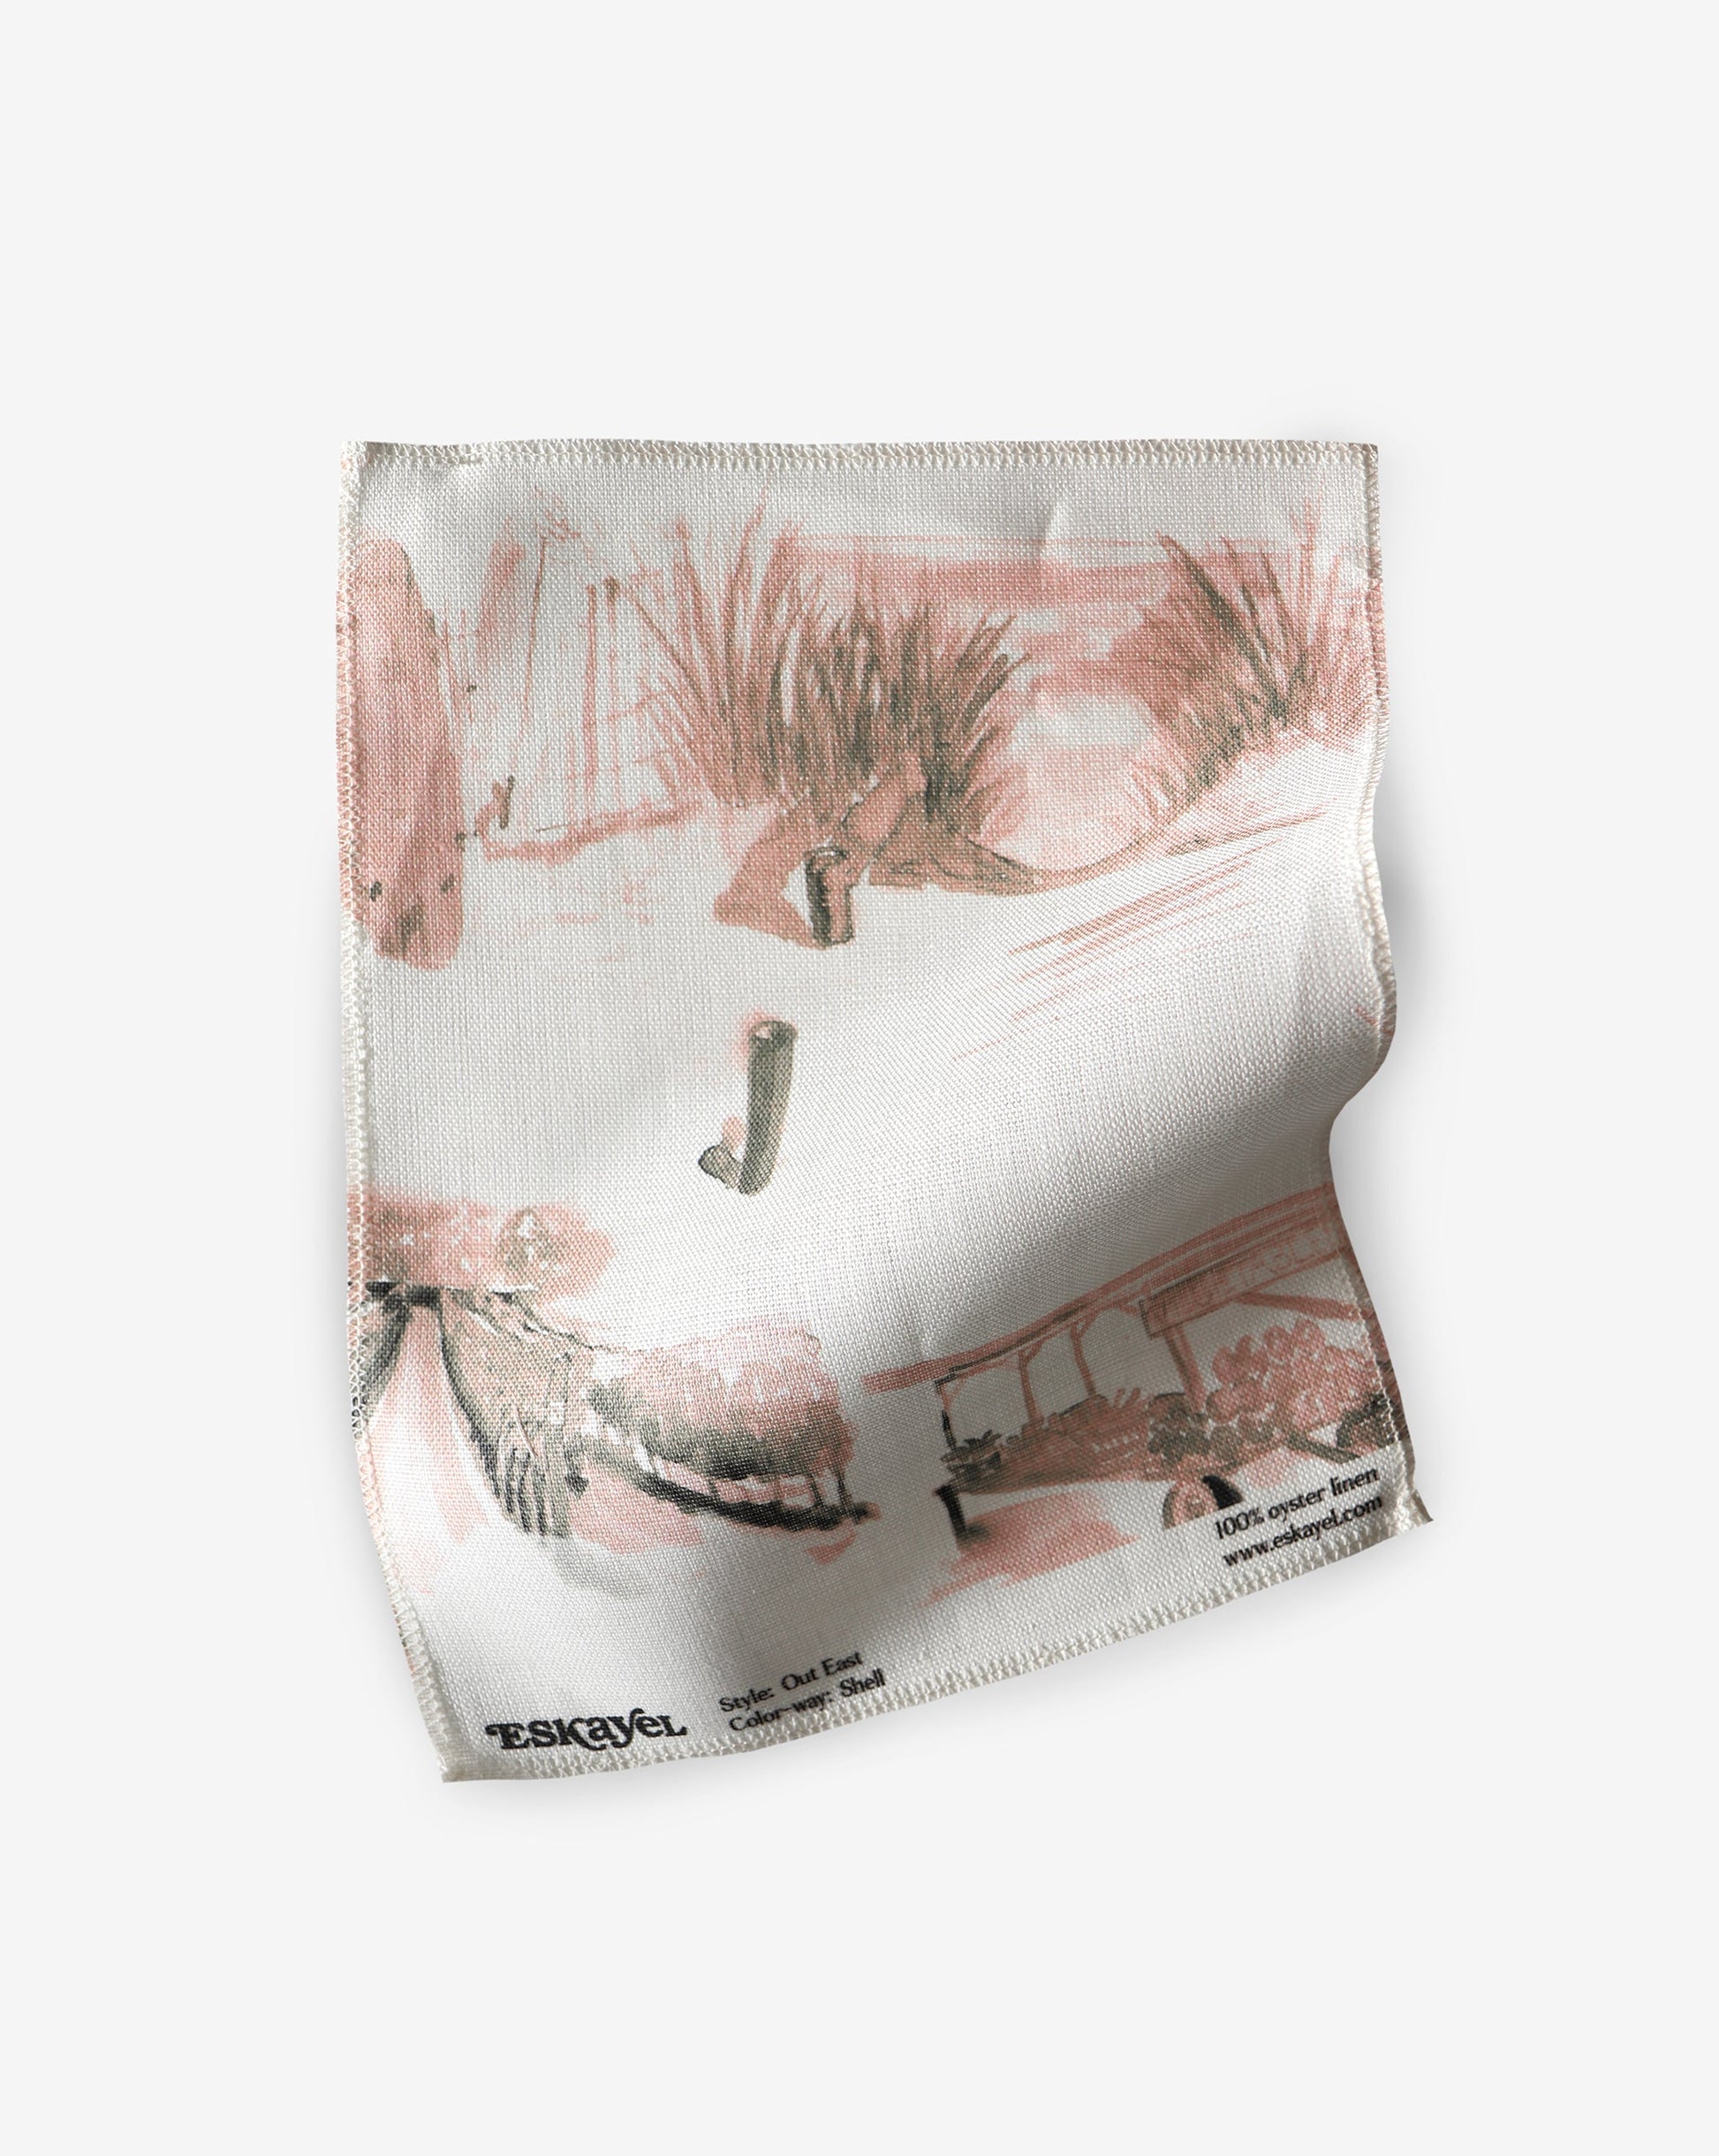 A Out East Fabric Shell fabric with a pink and brown toile pattern